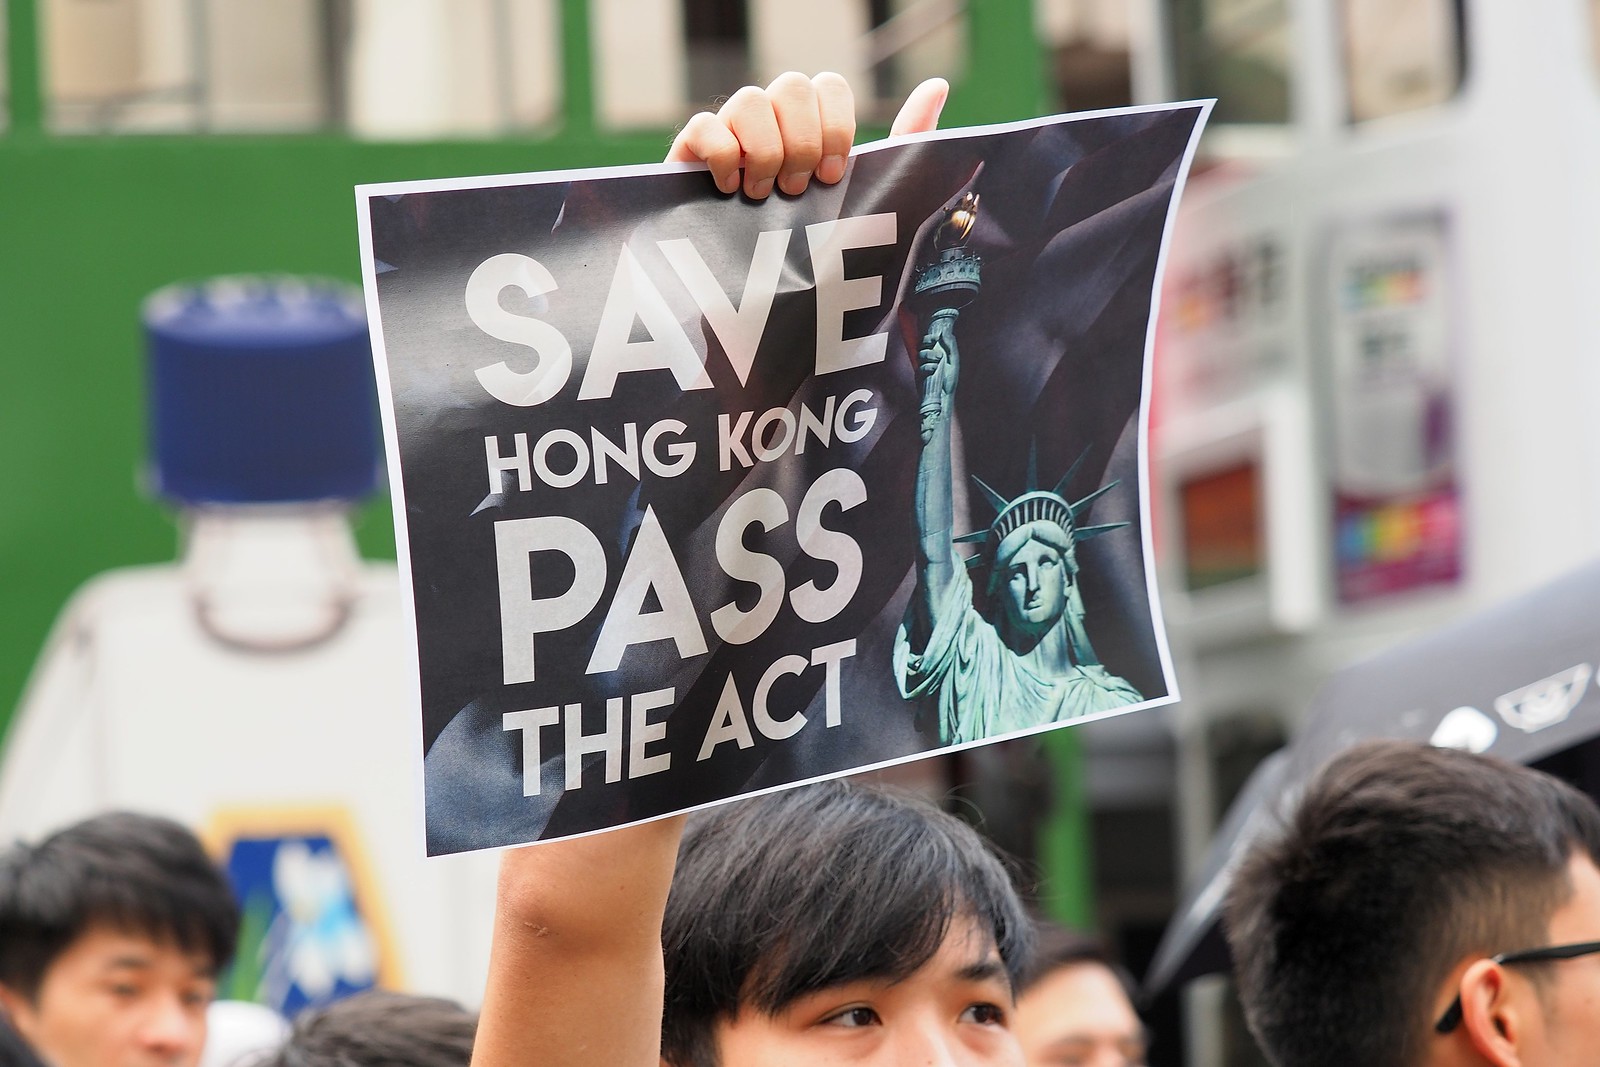 A protester holds up a sign calling on the U.S. to pass the Hong Kong Human Rights and Democracy Act during a rally in September. Photo via Flickr/Etan Liam.